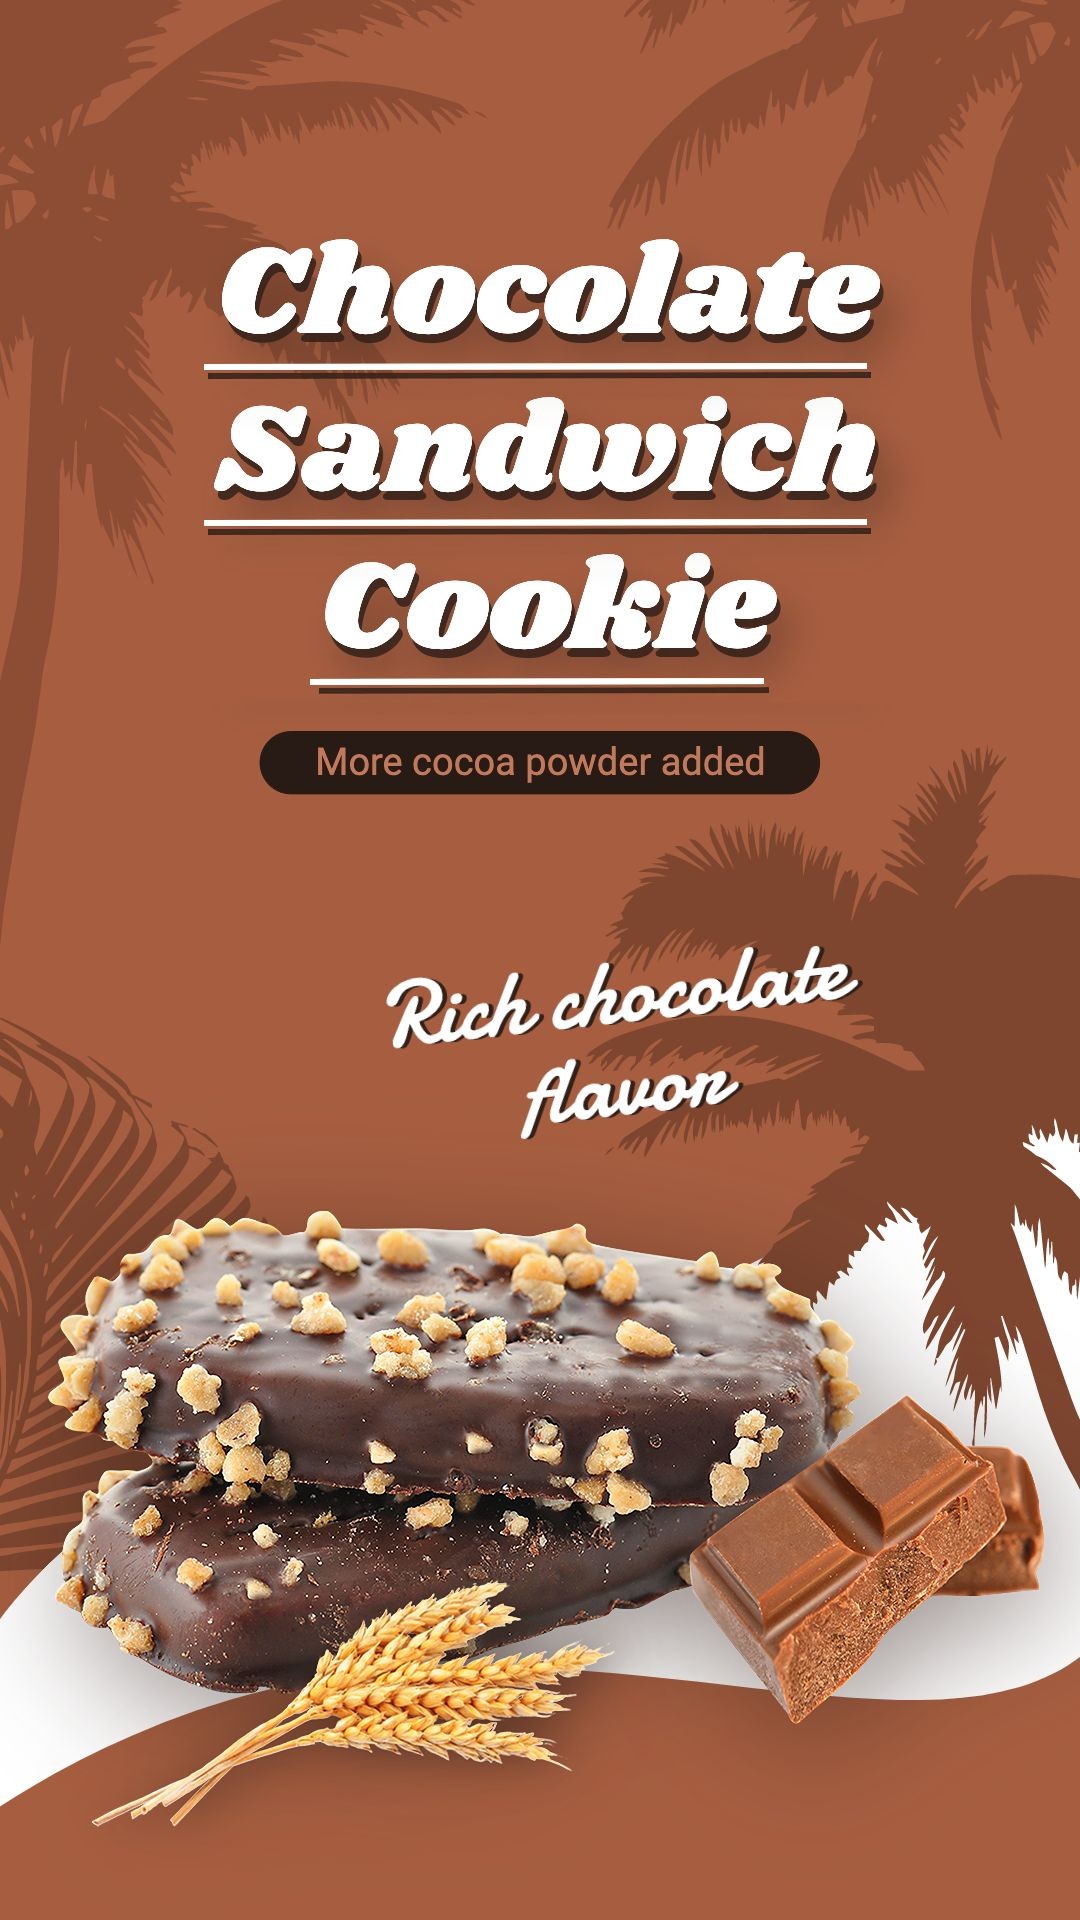 Chocolate Cookies Consumer Packaged Food Snacks Ecommerce Story 预览效果